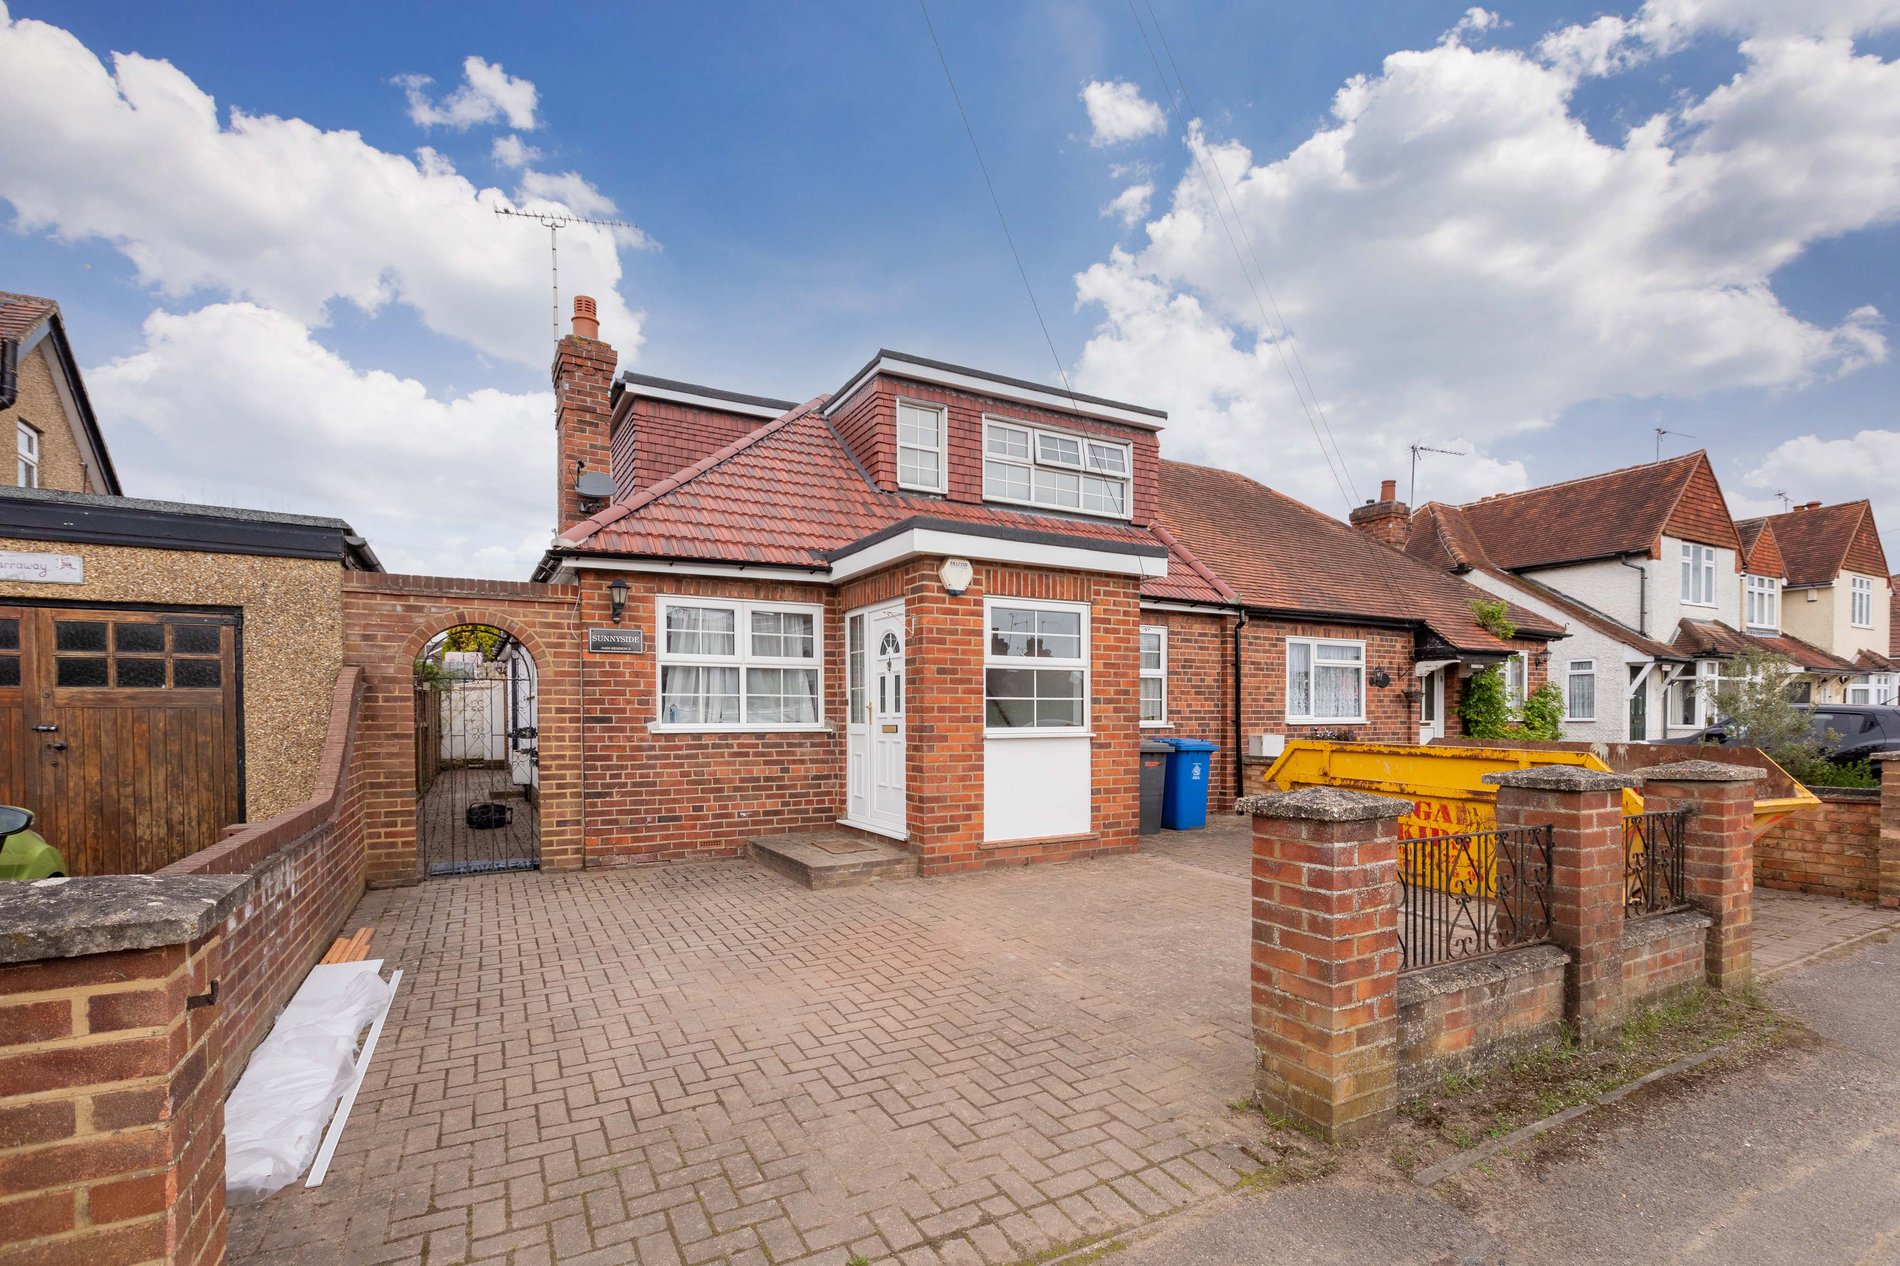 3 bed semi-detached house for sale in Smithfield Road, Maidenhead - Property Image 1